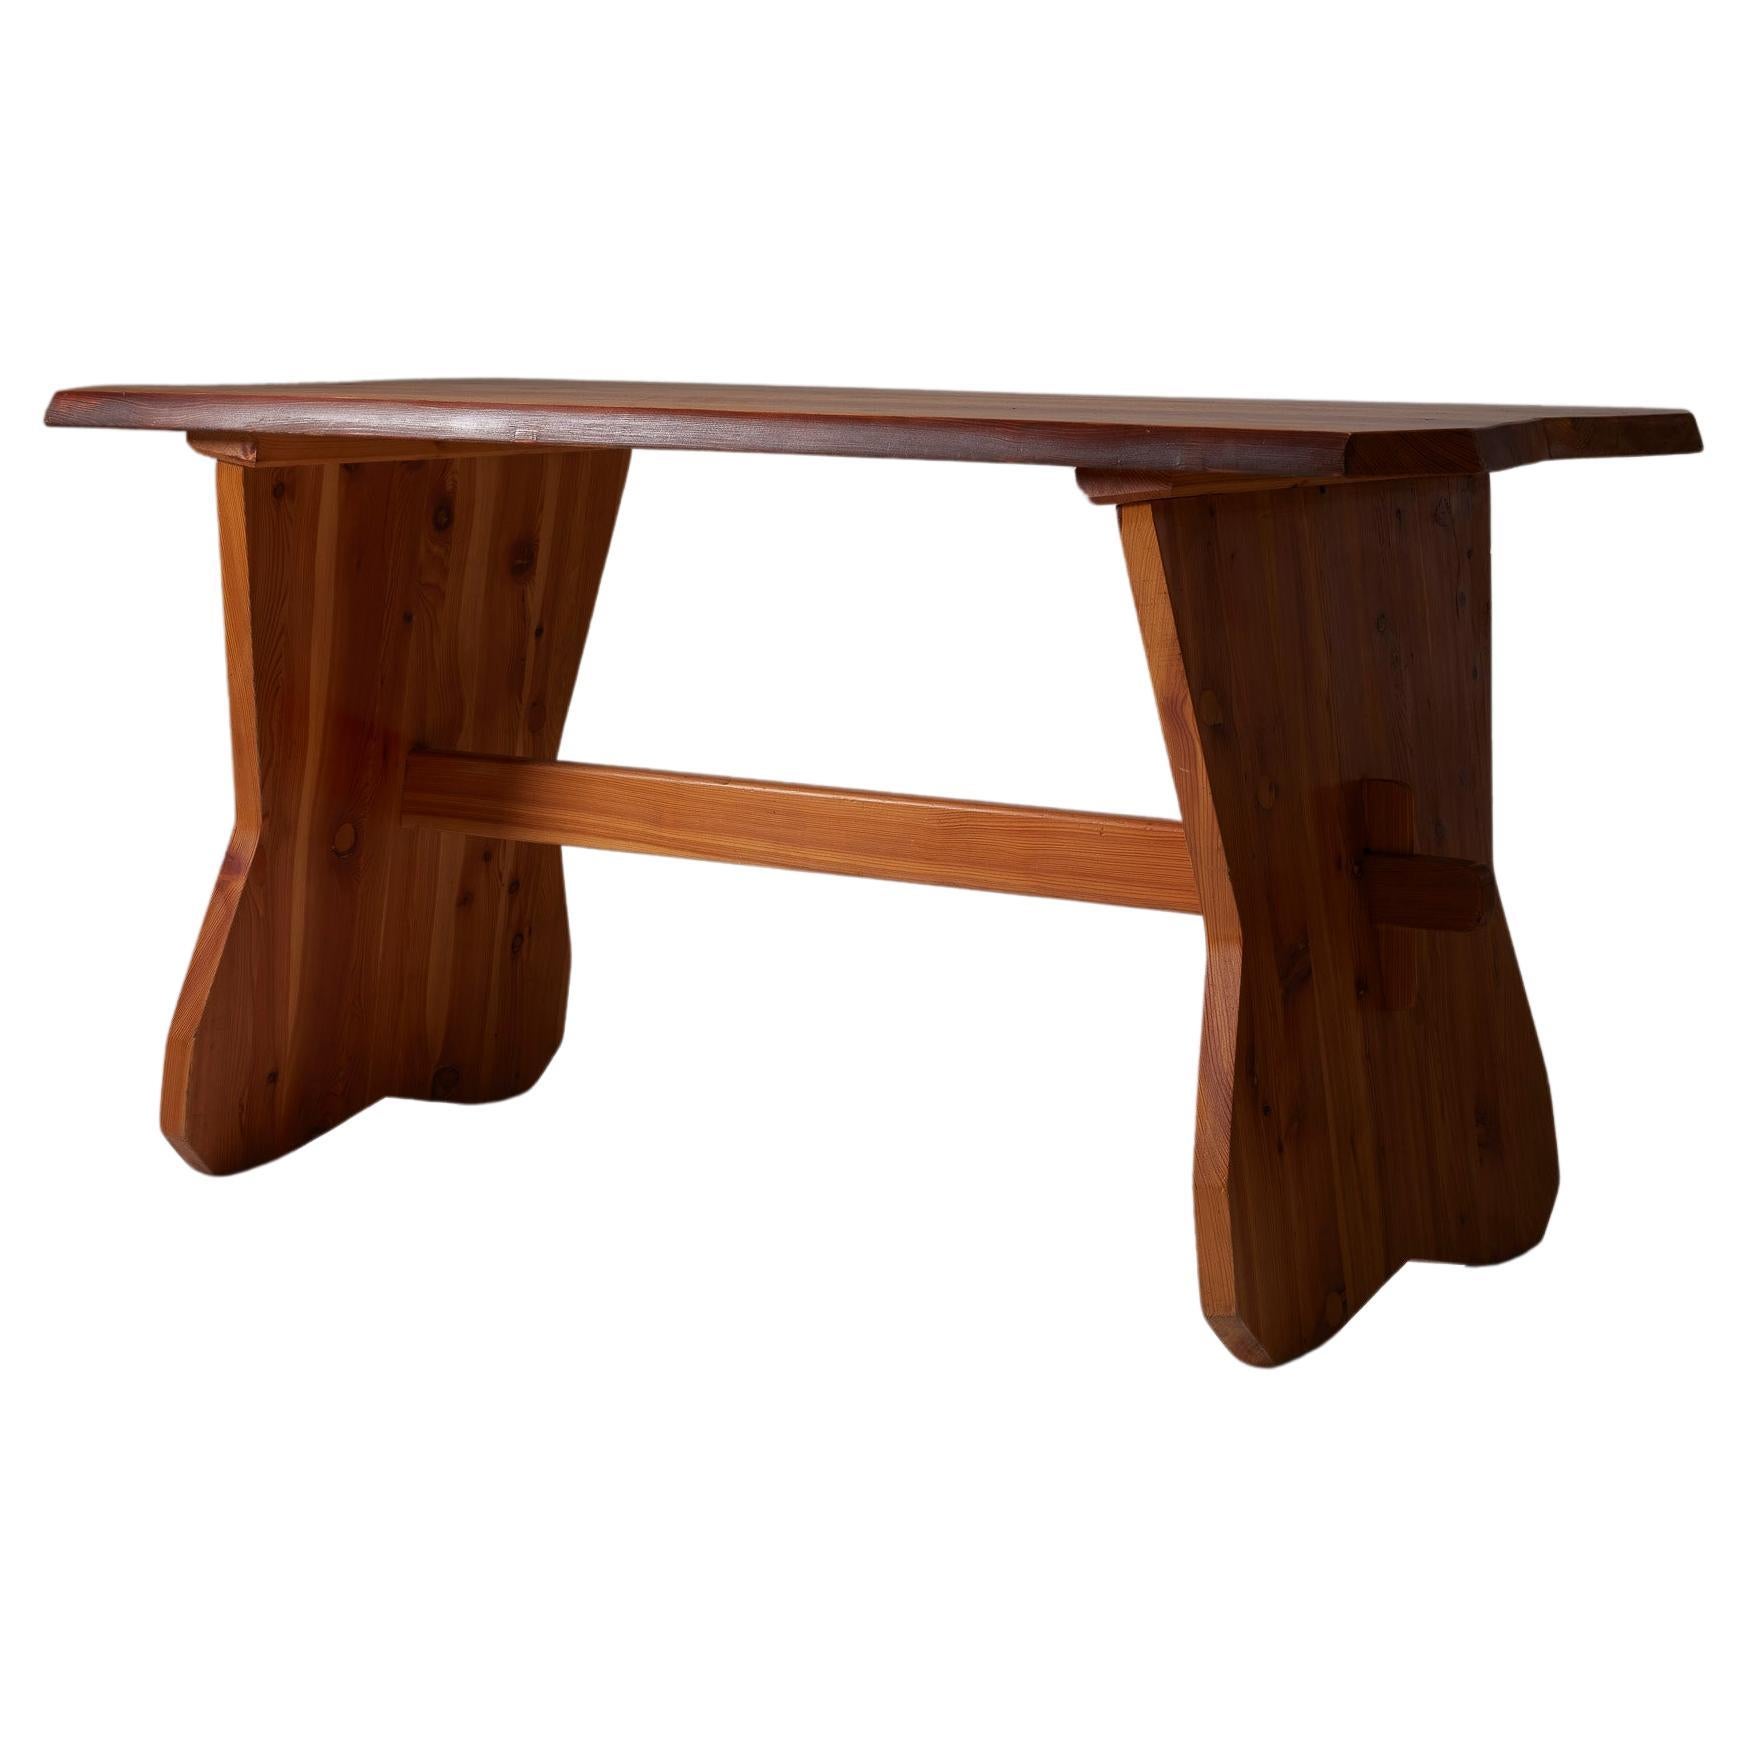 Solid pine dining table